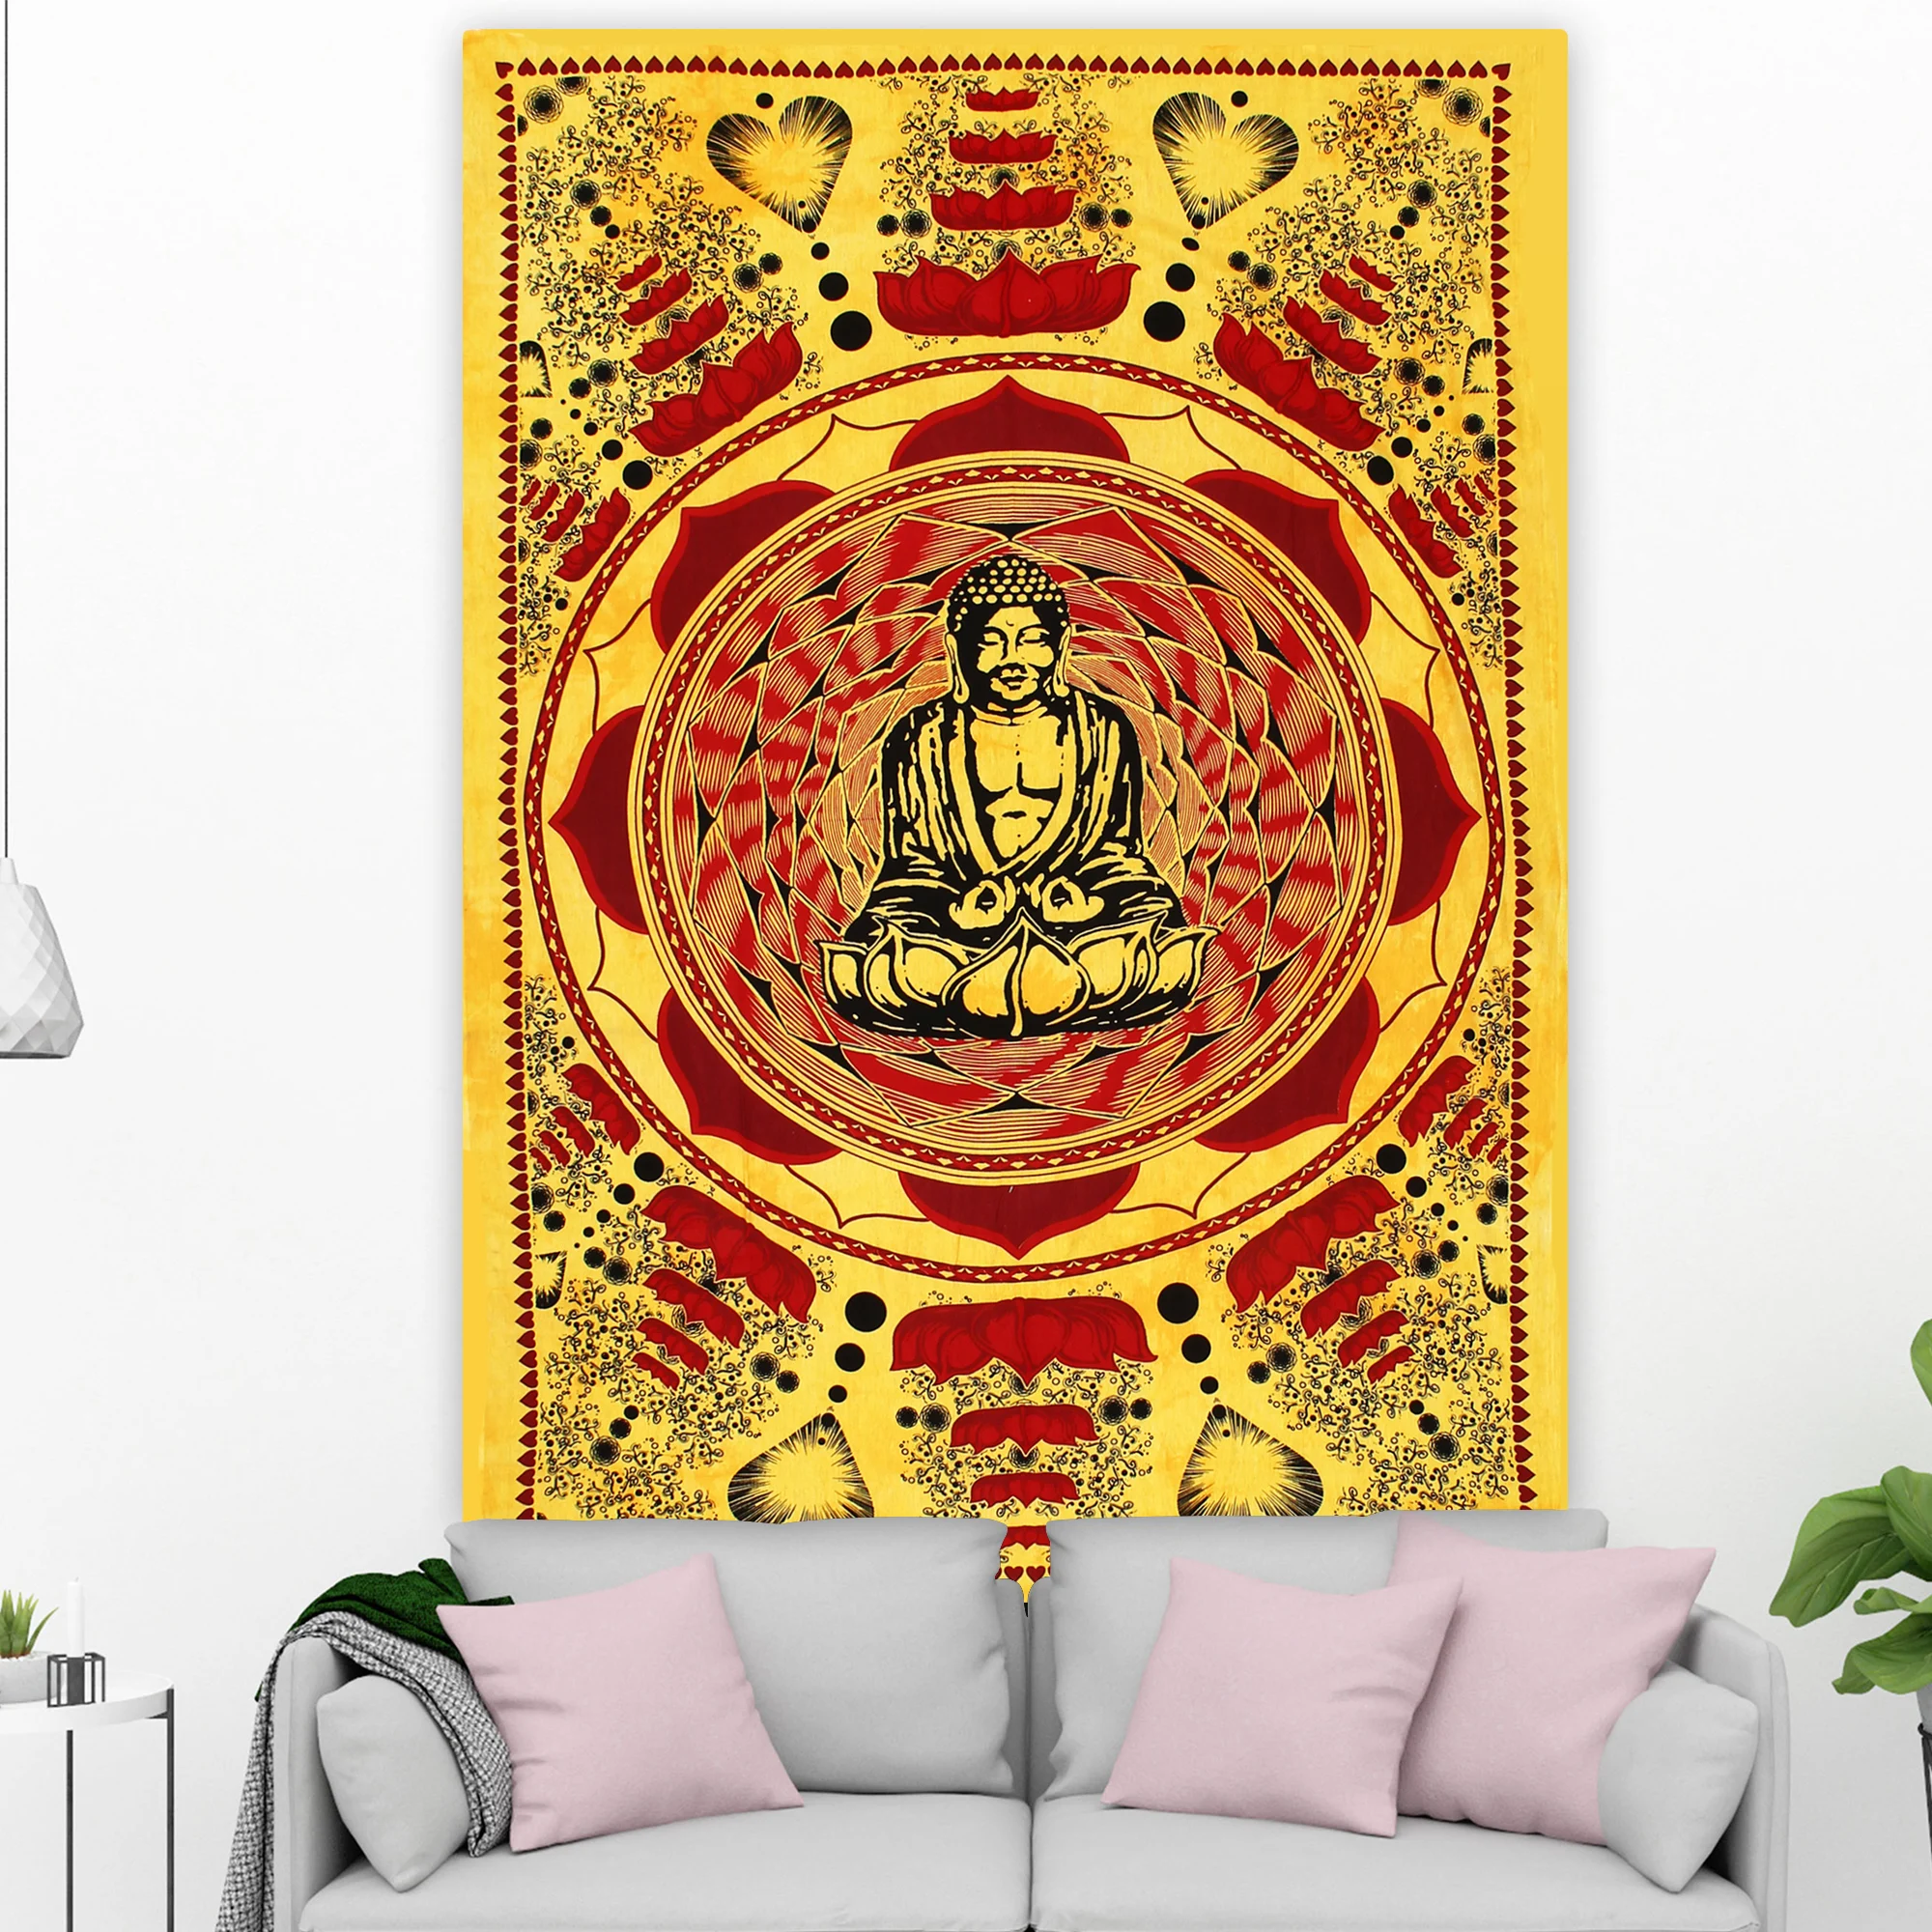 Twin Tapestry Wall Hanging Mandala Tapestries Indian Cotton Bedspread Wall Decor 